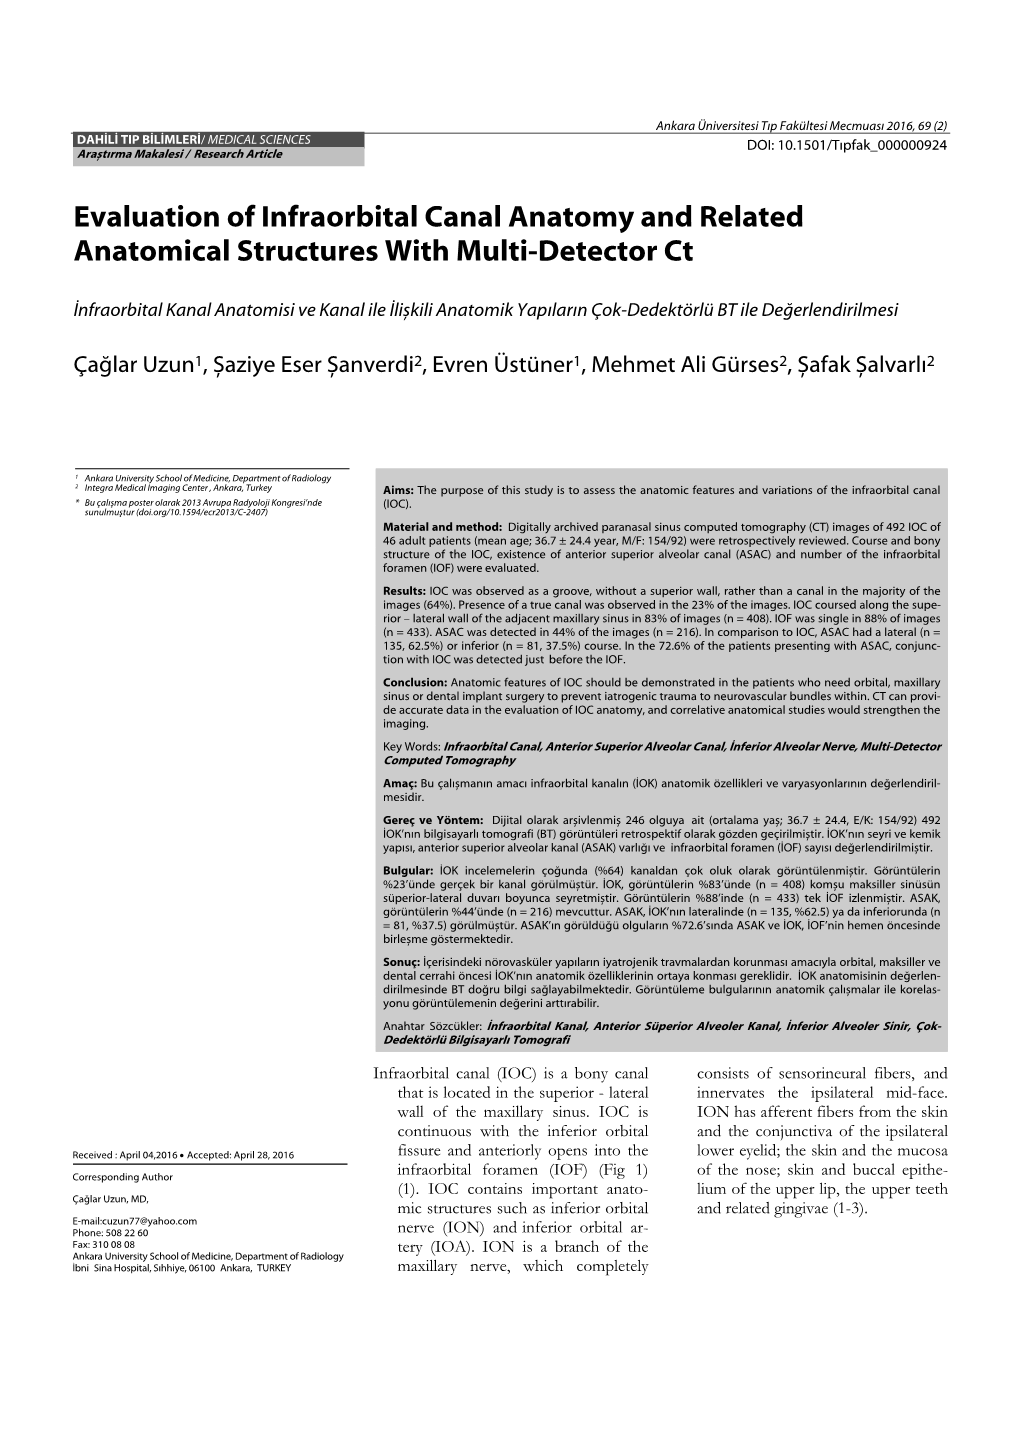 Evaluation of Infraorbital Canal Anatomy and Related Anatomical Structures with Multi-Detector Ct